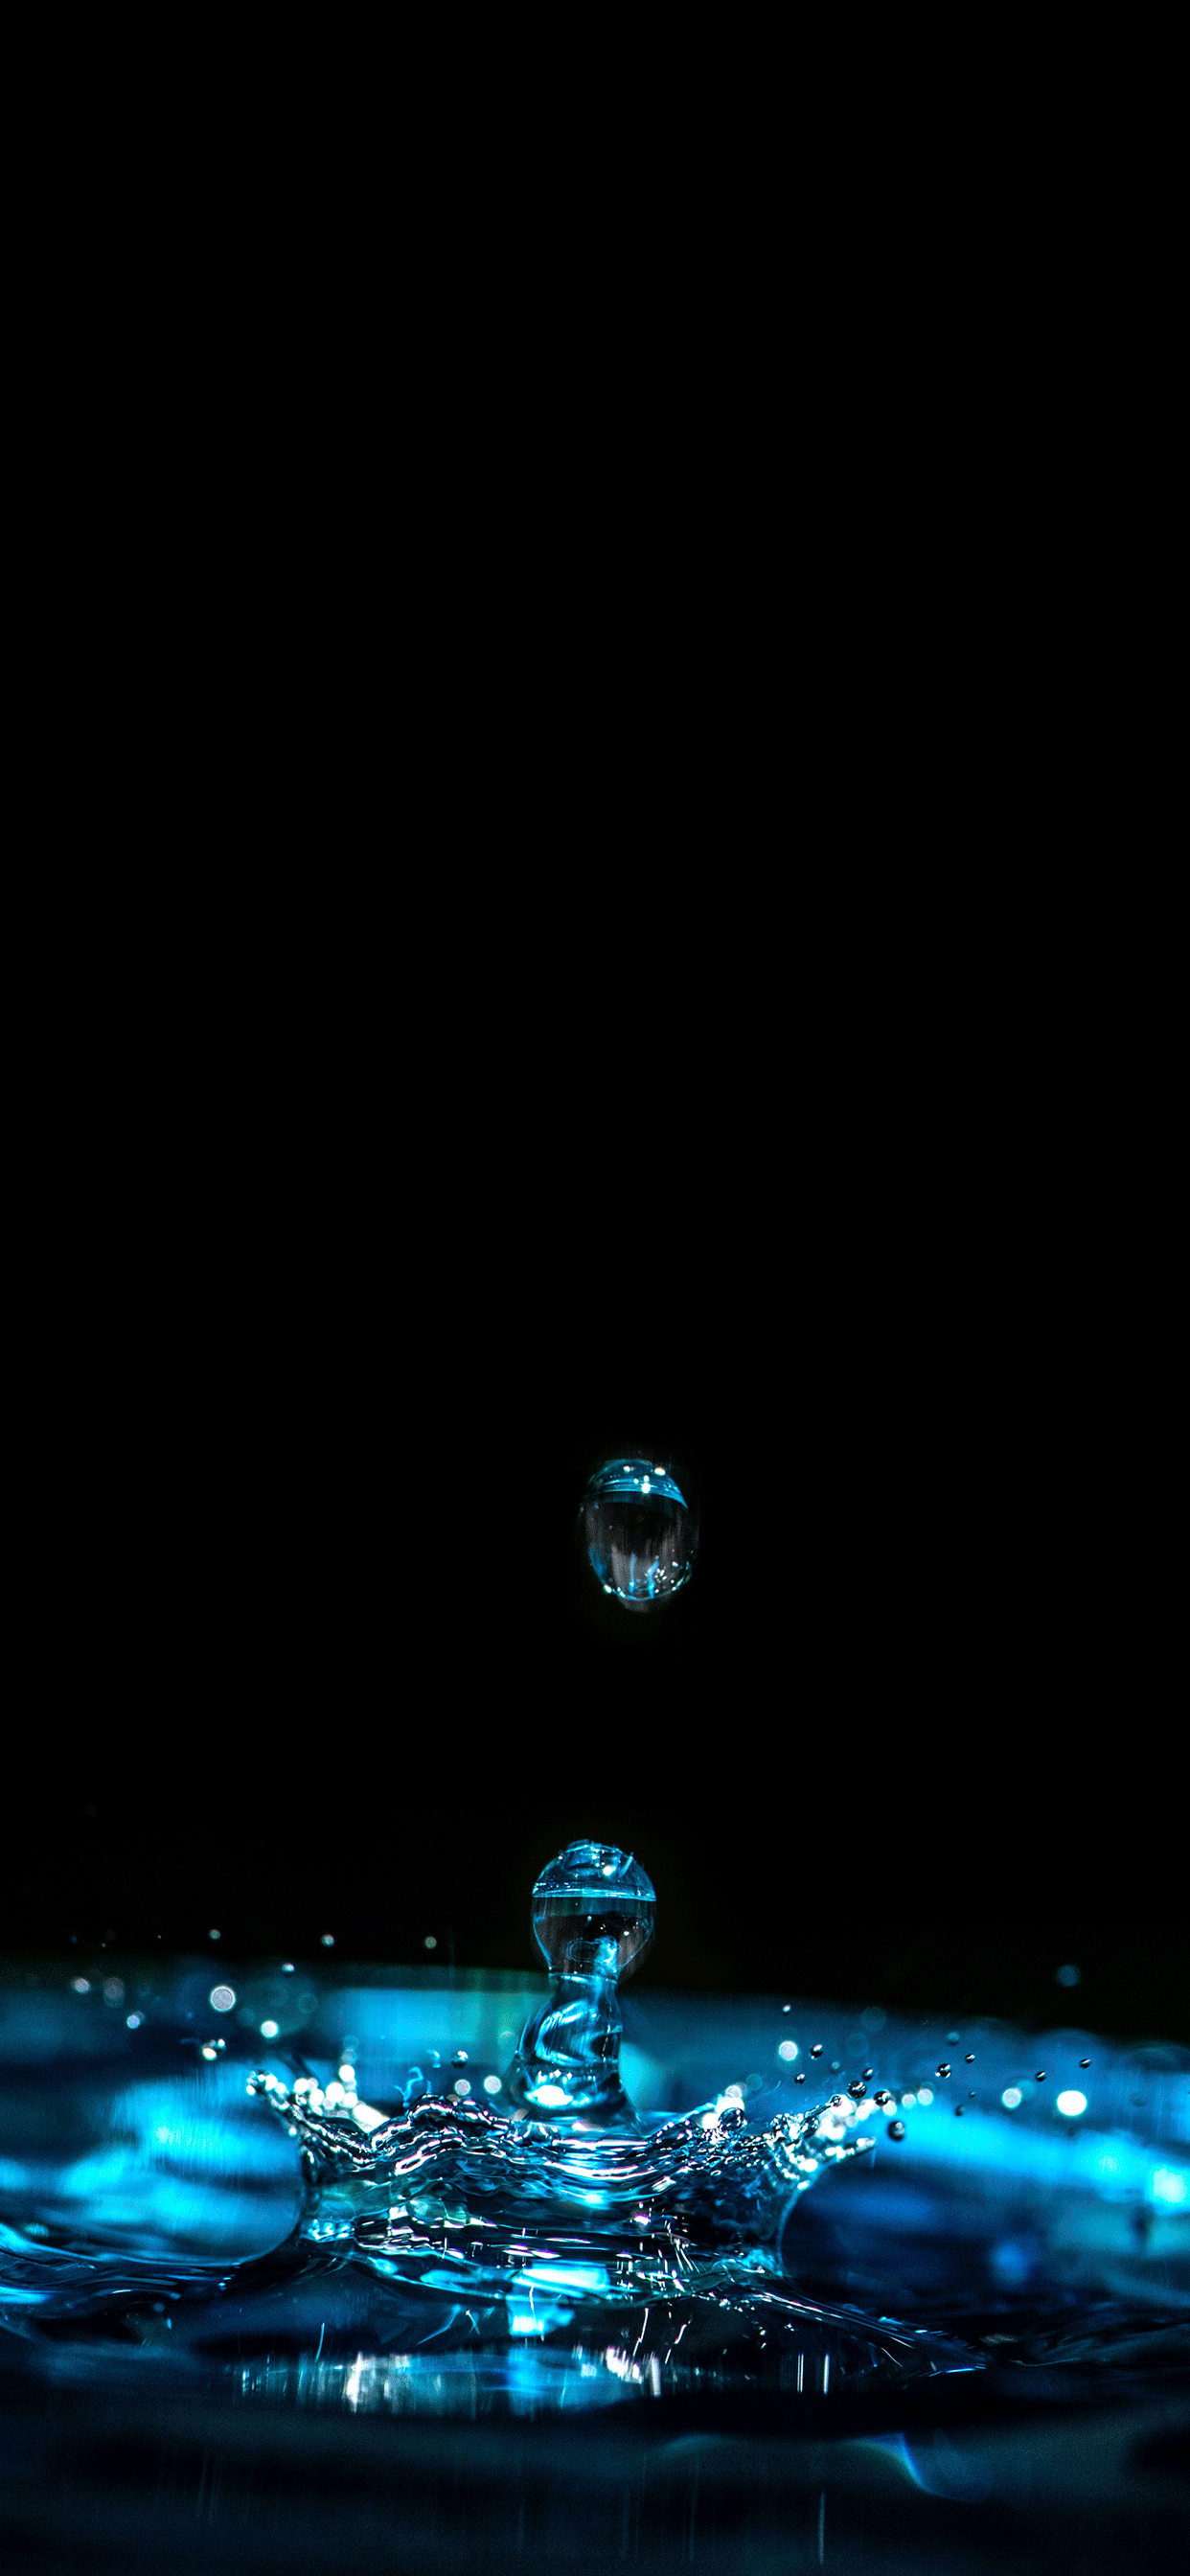 Water drops Wallpaper for iPhone X, 6 Download